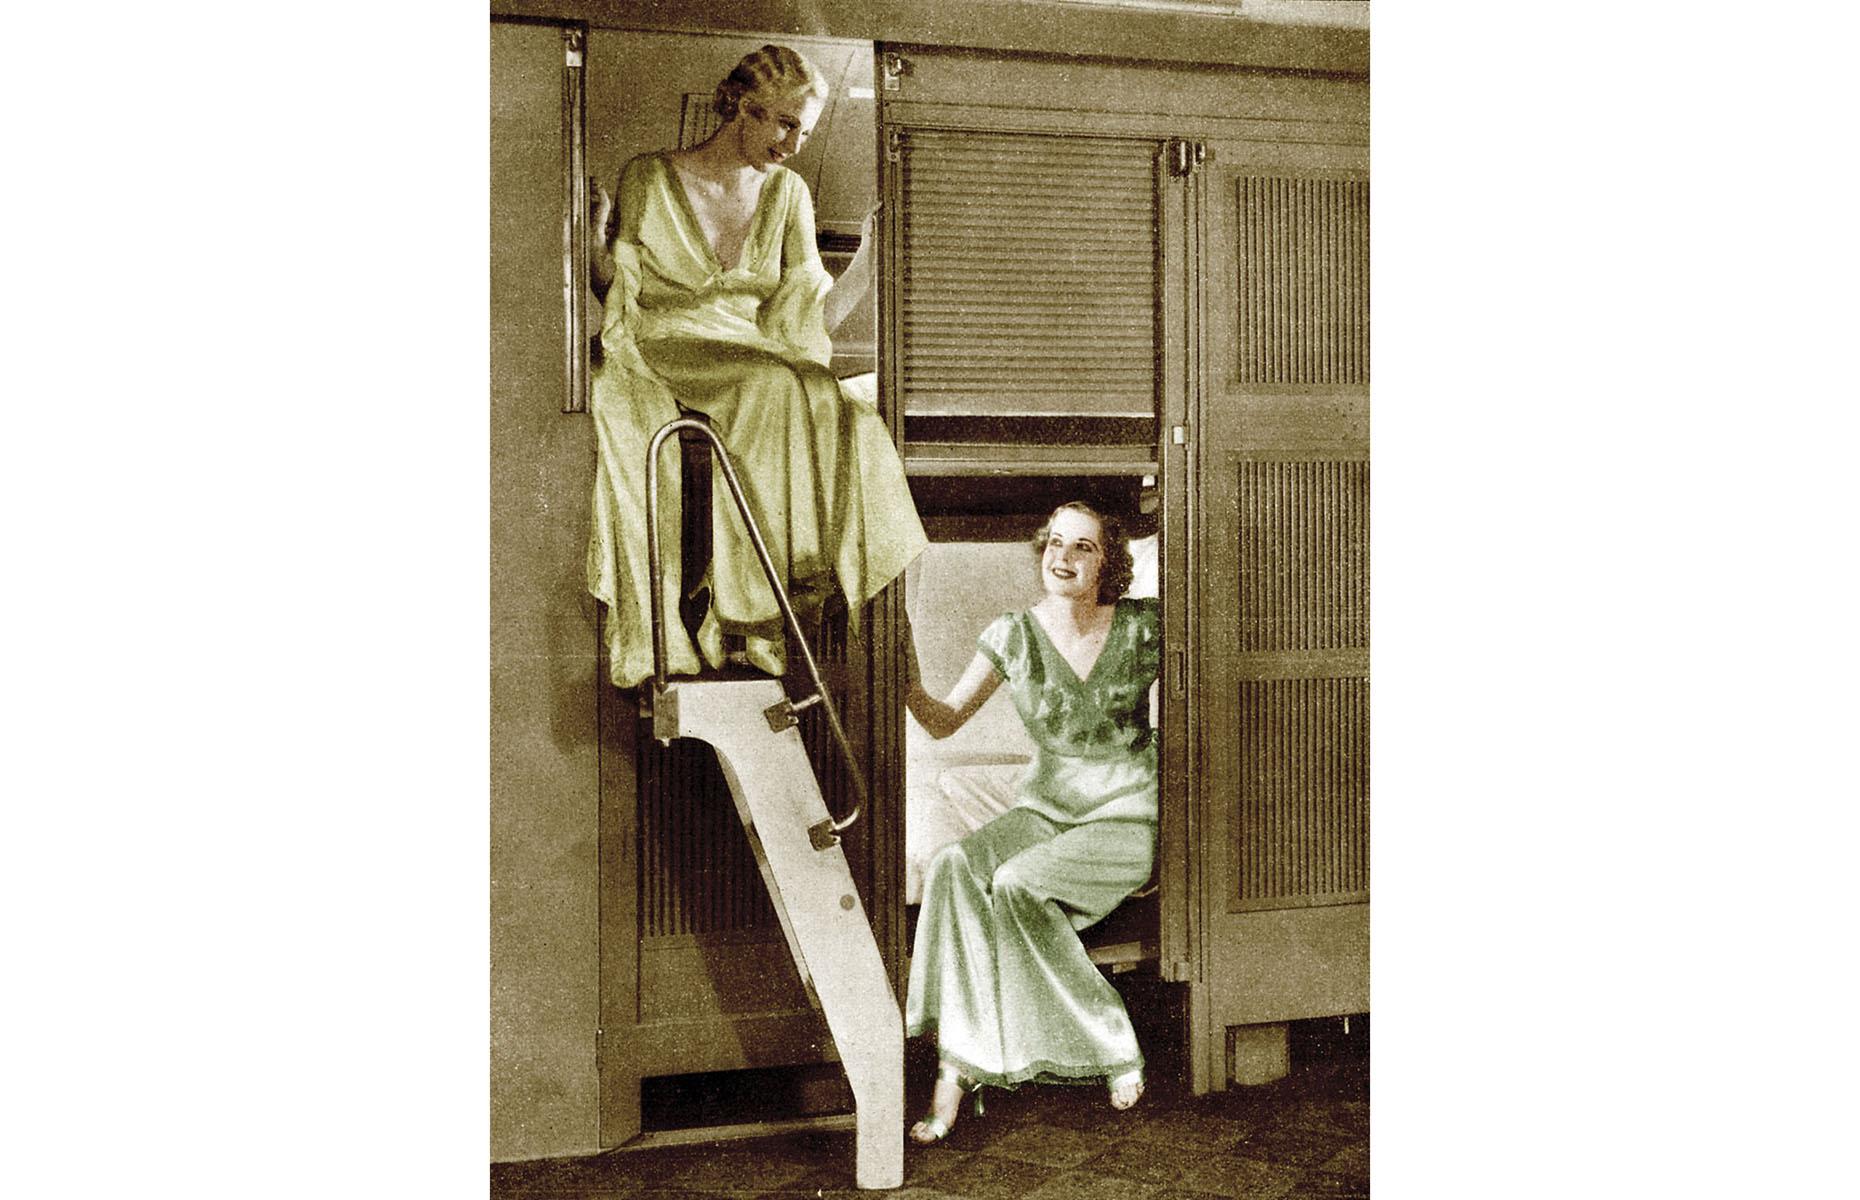 Although the 1930s was a turbulent decade largely defined by the stock market crash and the Great Depression in the US, as well as the start of the Second World War, the Roaring Twenties had left its mark on train travel. Still a rather luxurious experience, especially for the wealthy, here two ladies in silk nightwear are captured inside a sleeping compartment on a Union Pacific Railroad train in the 1930s.